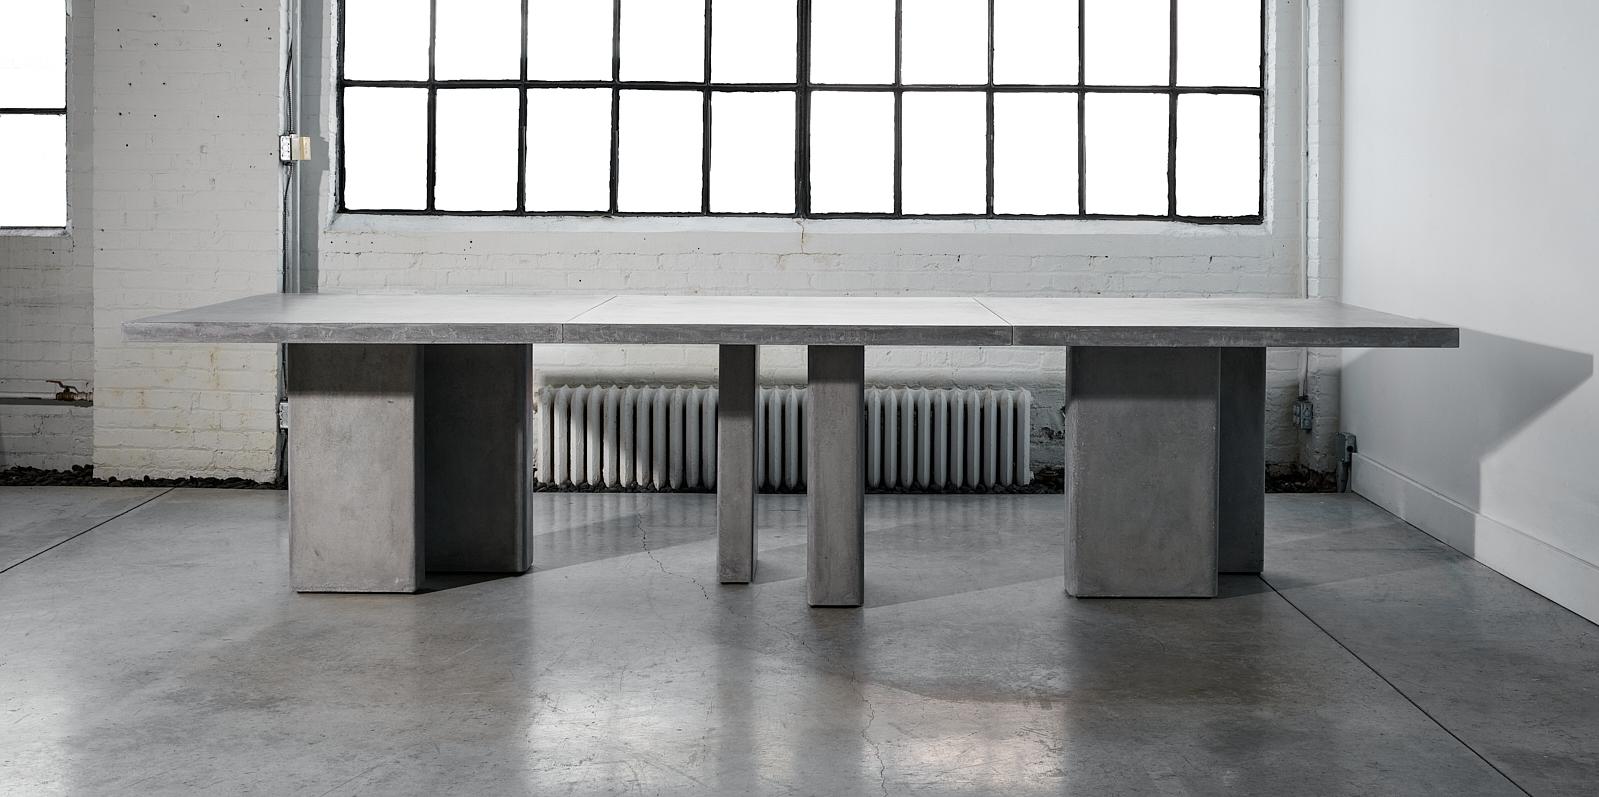 STACKLAB’s innovative Engineered Cementitious Composite (ECC) table system is designed in collaboration with Toronto-based materials engineer and artisan Alla Linetsky.

Comprised of over 90 percent non-virgin materials, the ECC System features